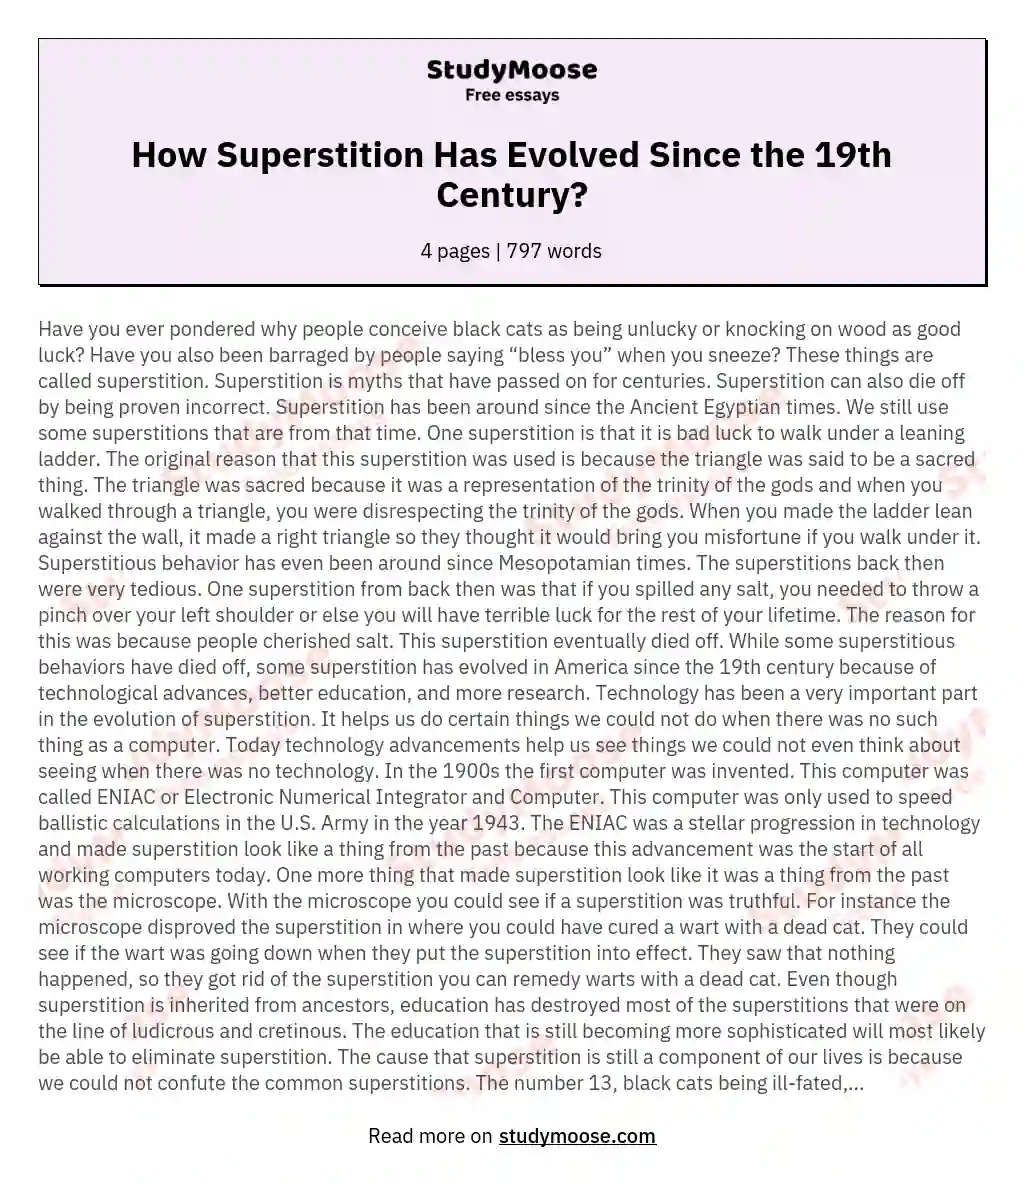 How Superstition Has Evolved Since the 19th Century? essay